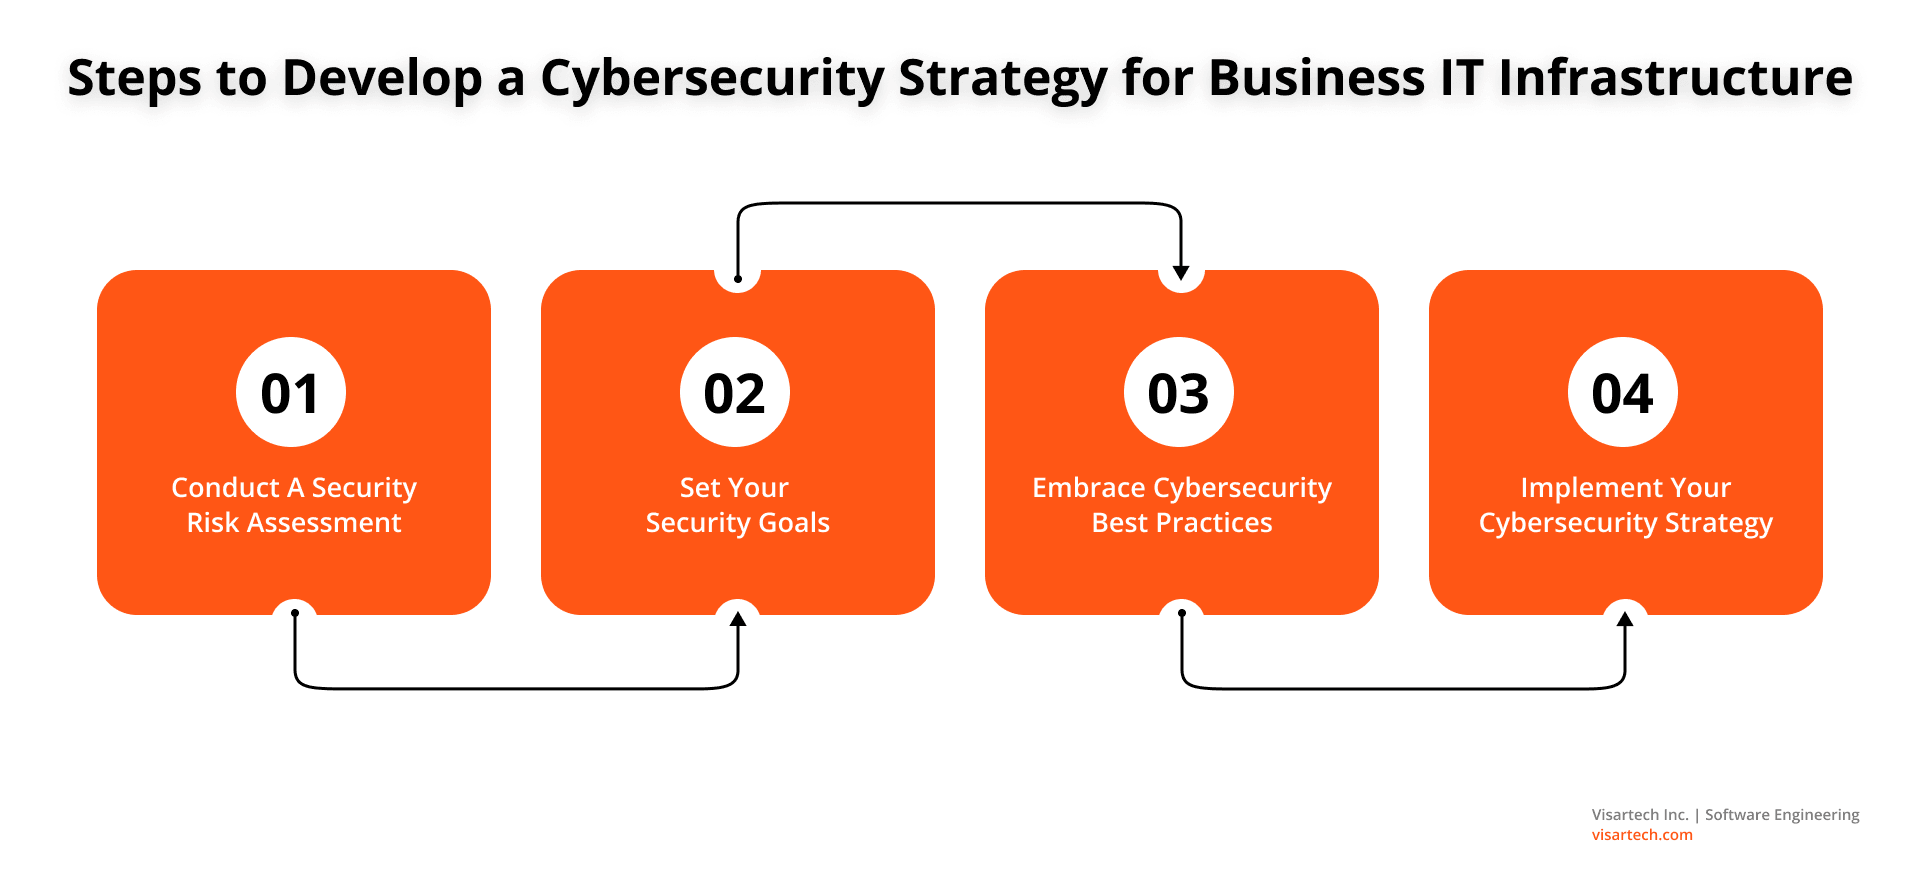 Steps to Develop a Cybersecurity Strategy for Business Infrastructure - Visartech Blog